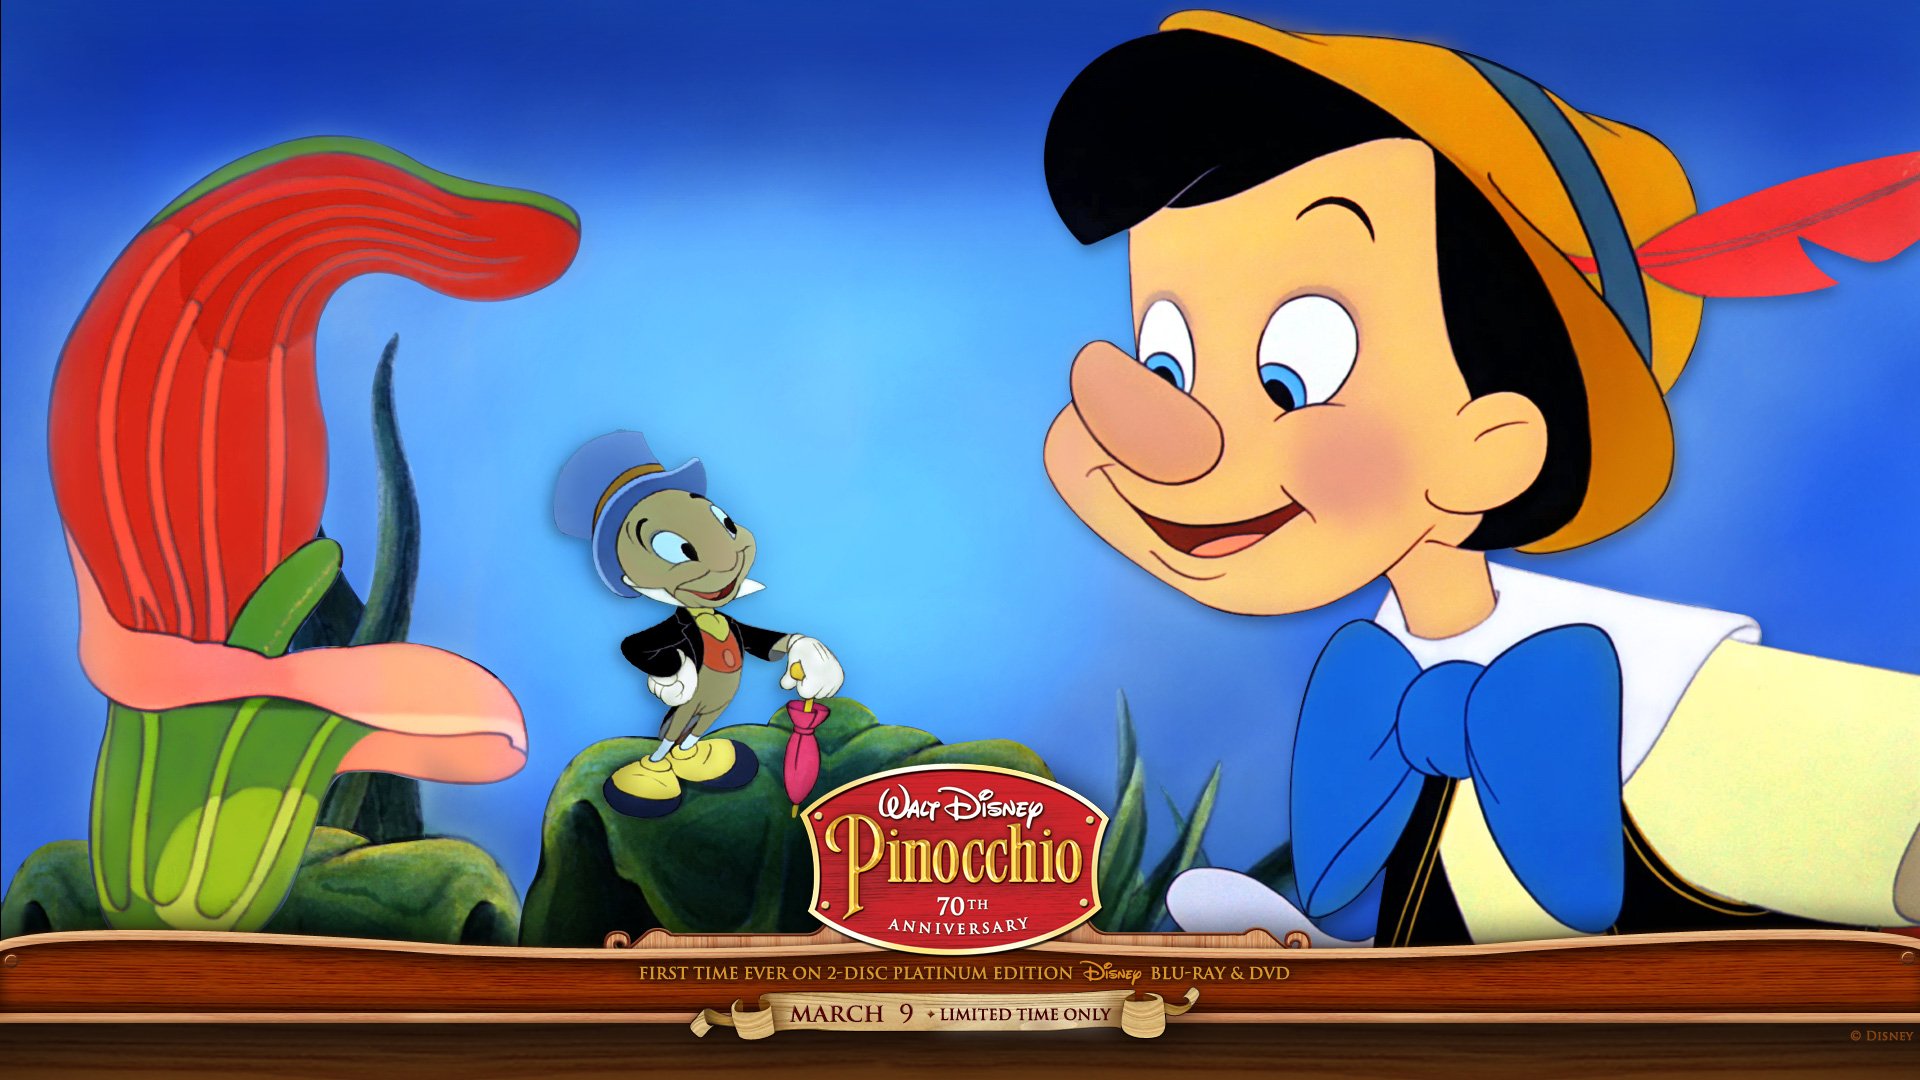 pinocchio, Puppet, Disney, Comedy, Family, Animation, Fantasy, 1pinocchio, Wood, Wooden, Marionette Wallpaper